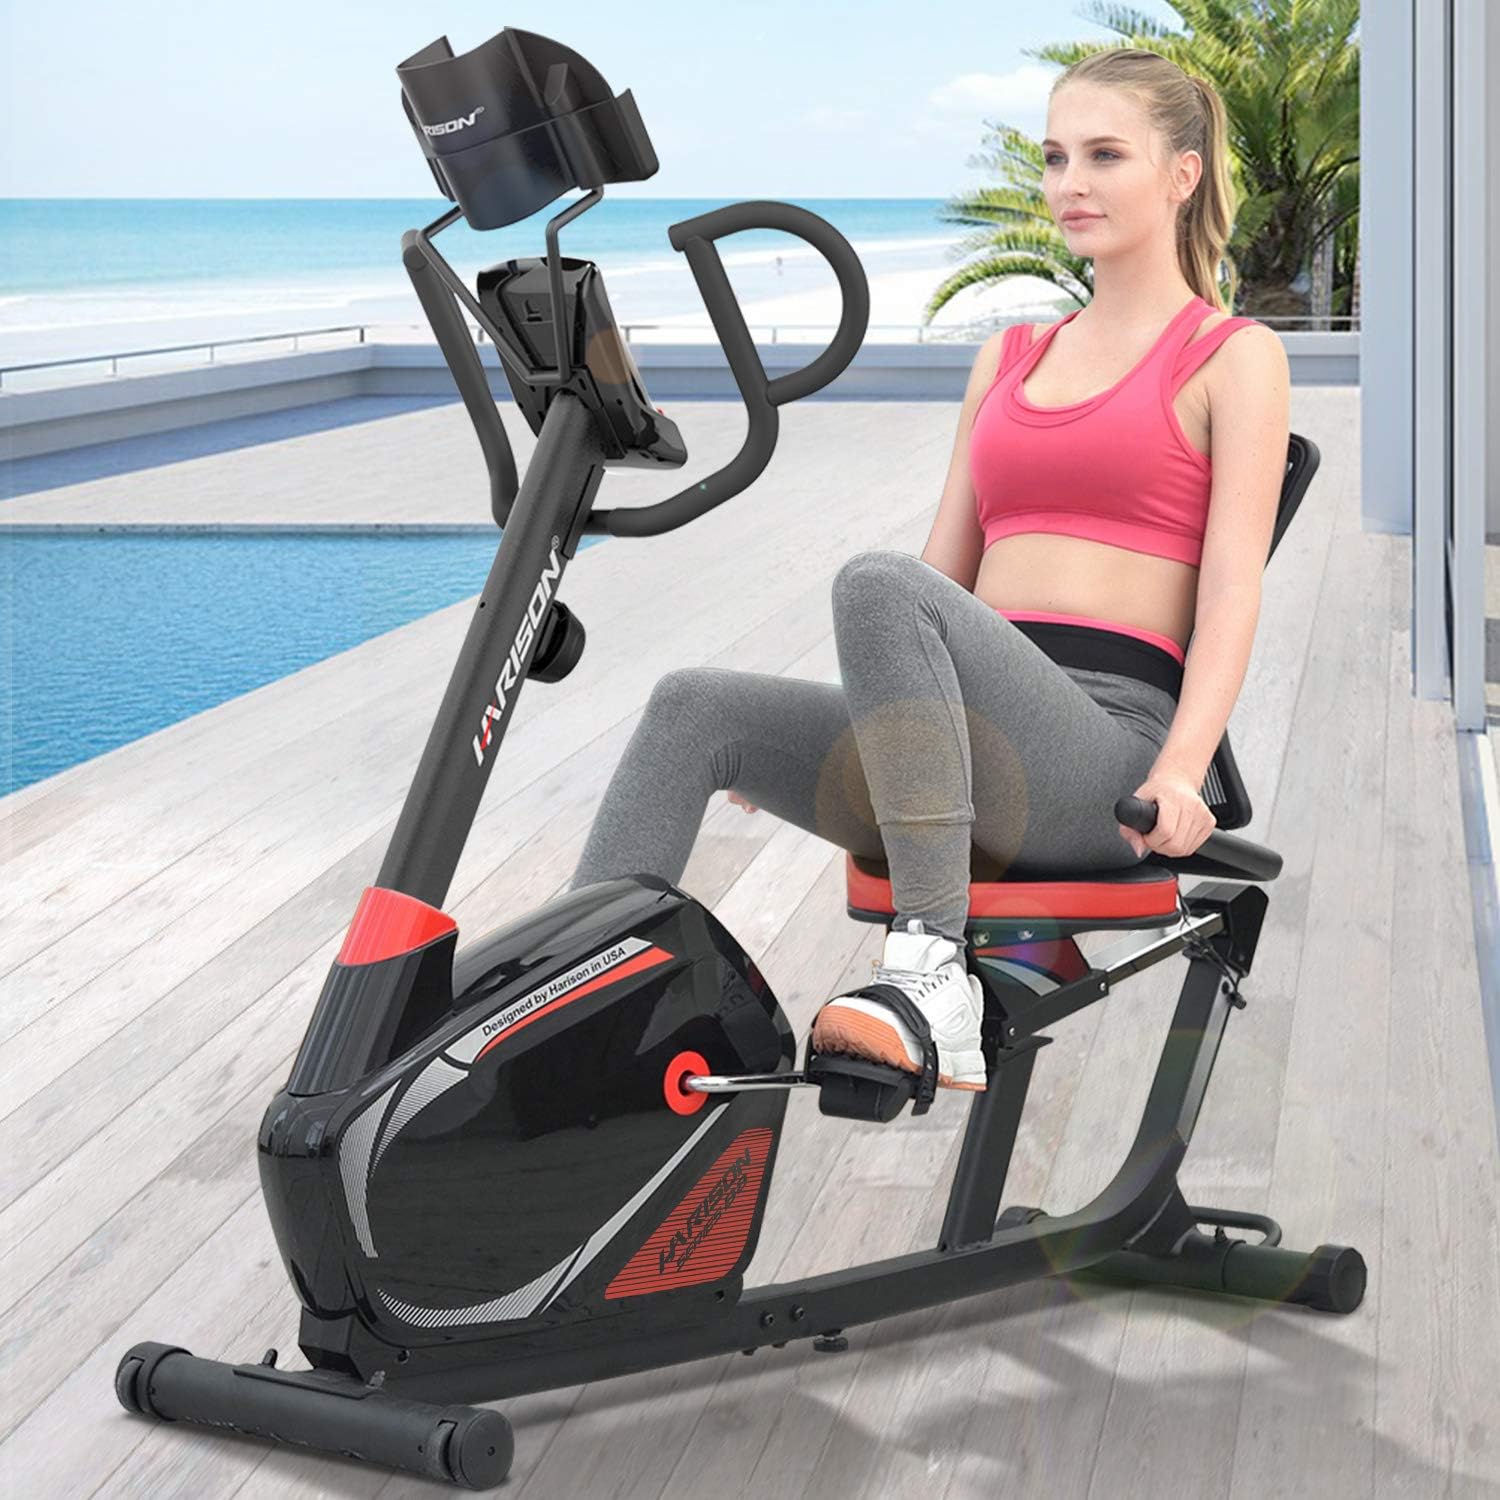 Upright bike indoor cycling Bike for Home Gym Cardio Workout 350 LBS Capacity HARISON Exercise Bike Stationary Magnetic Resistance